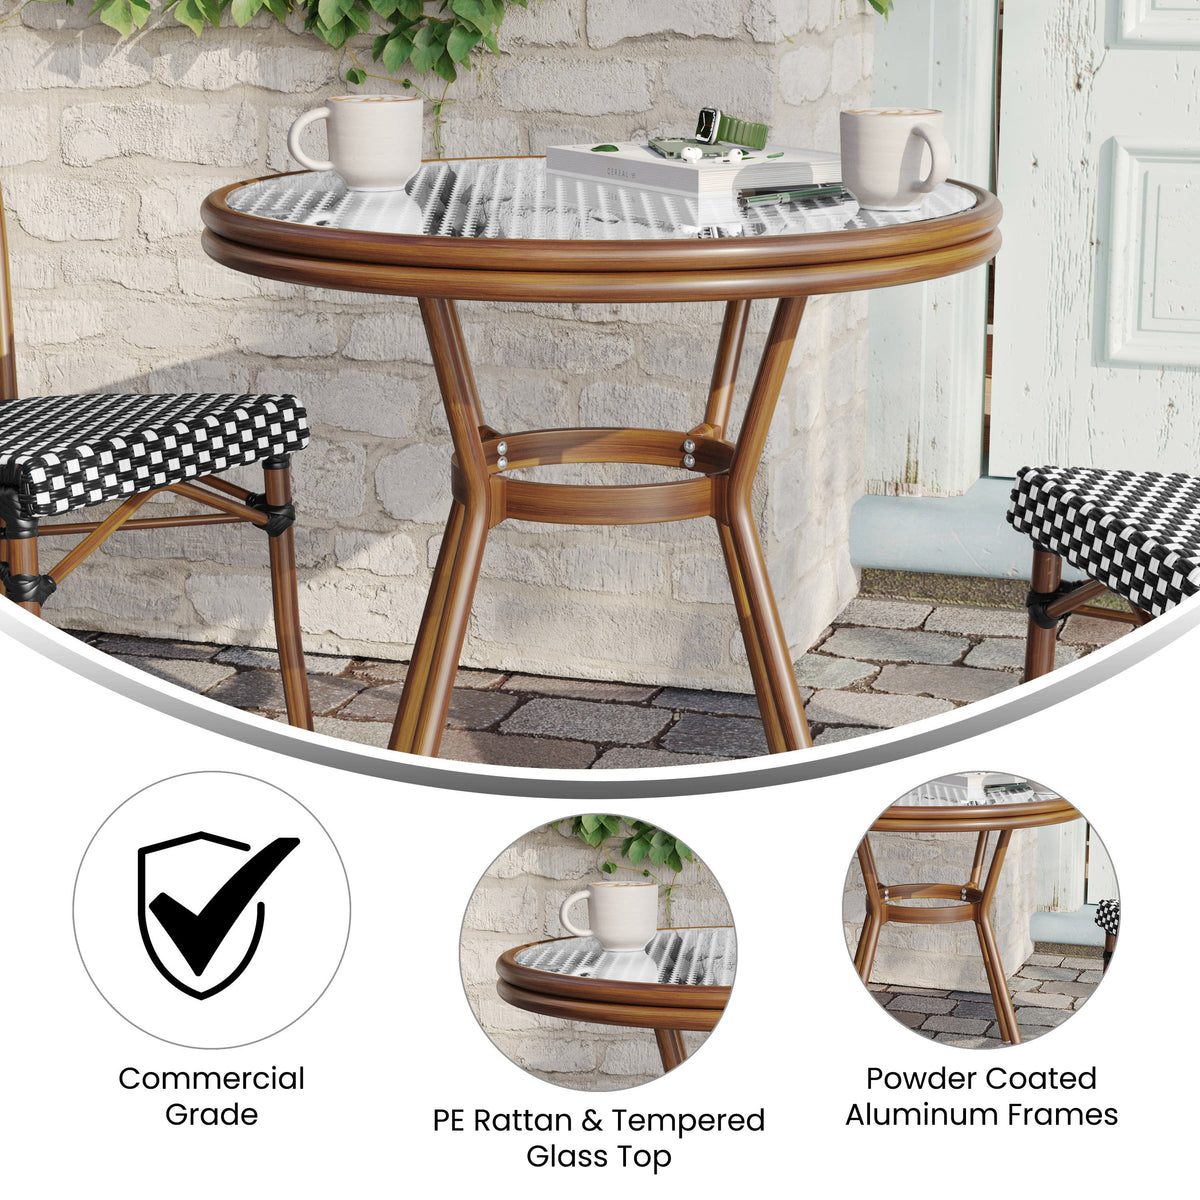 Black & White Rattan/Natural Frame |#| Indoor/Outdoor Commercial Glass Top French Bistro Table in Black/White